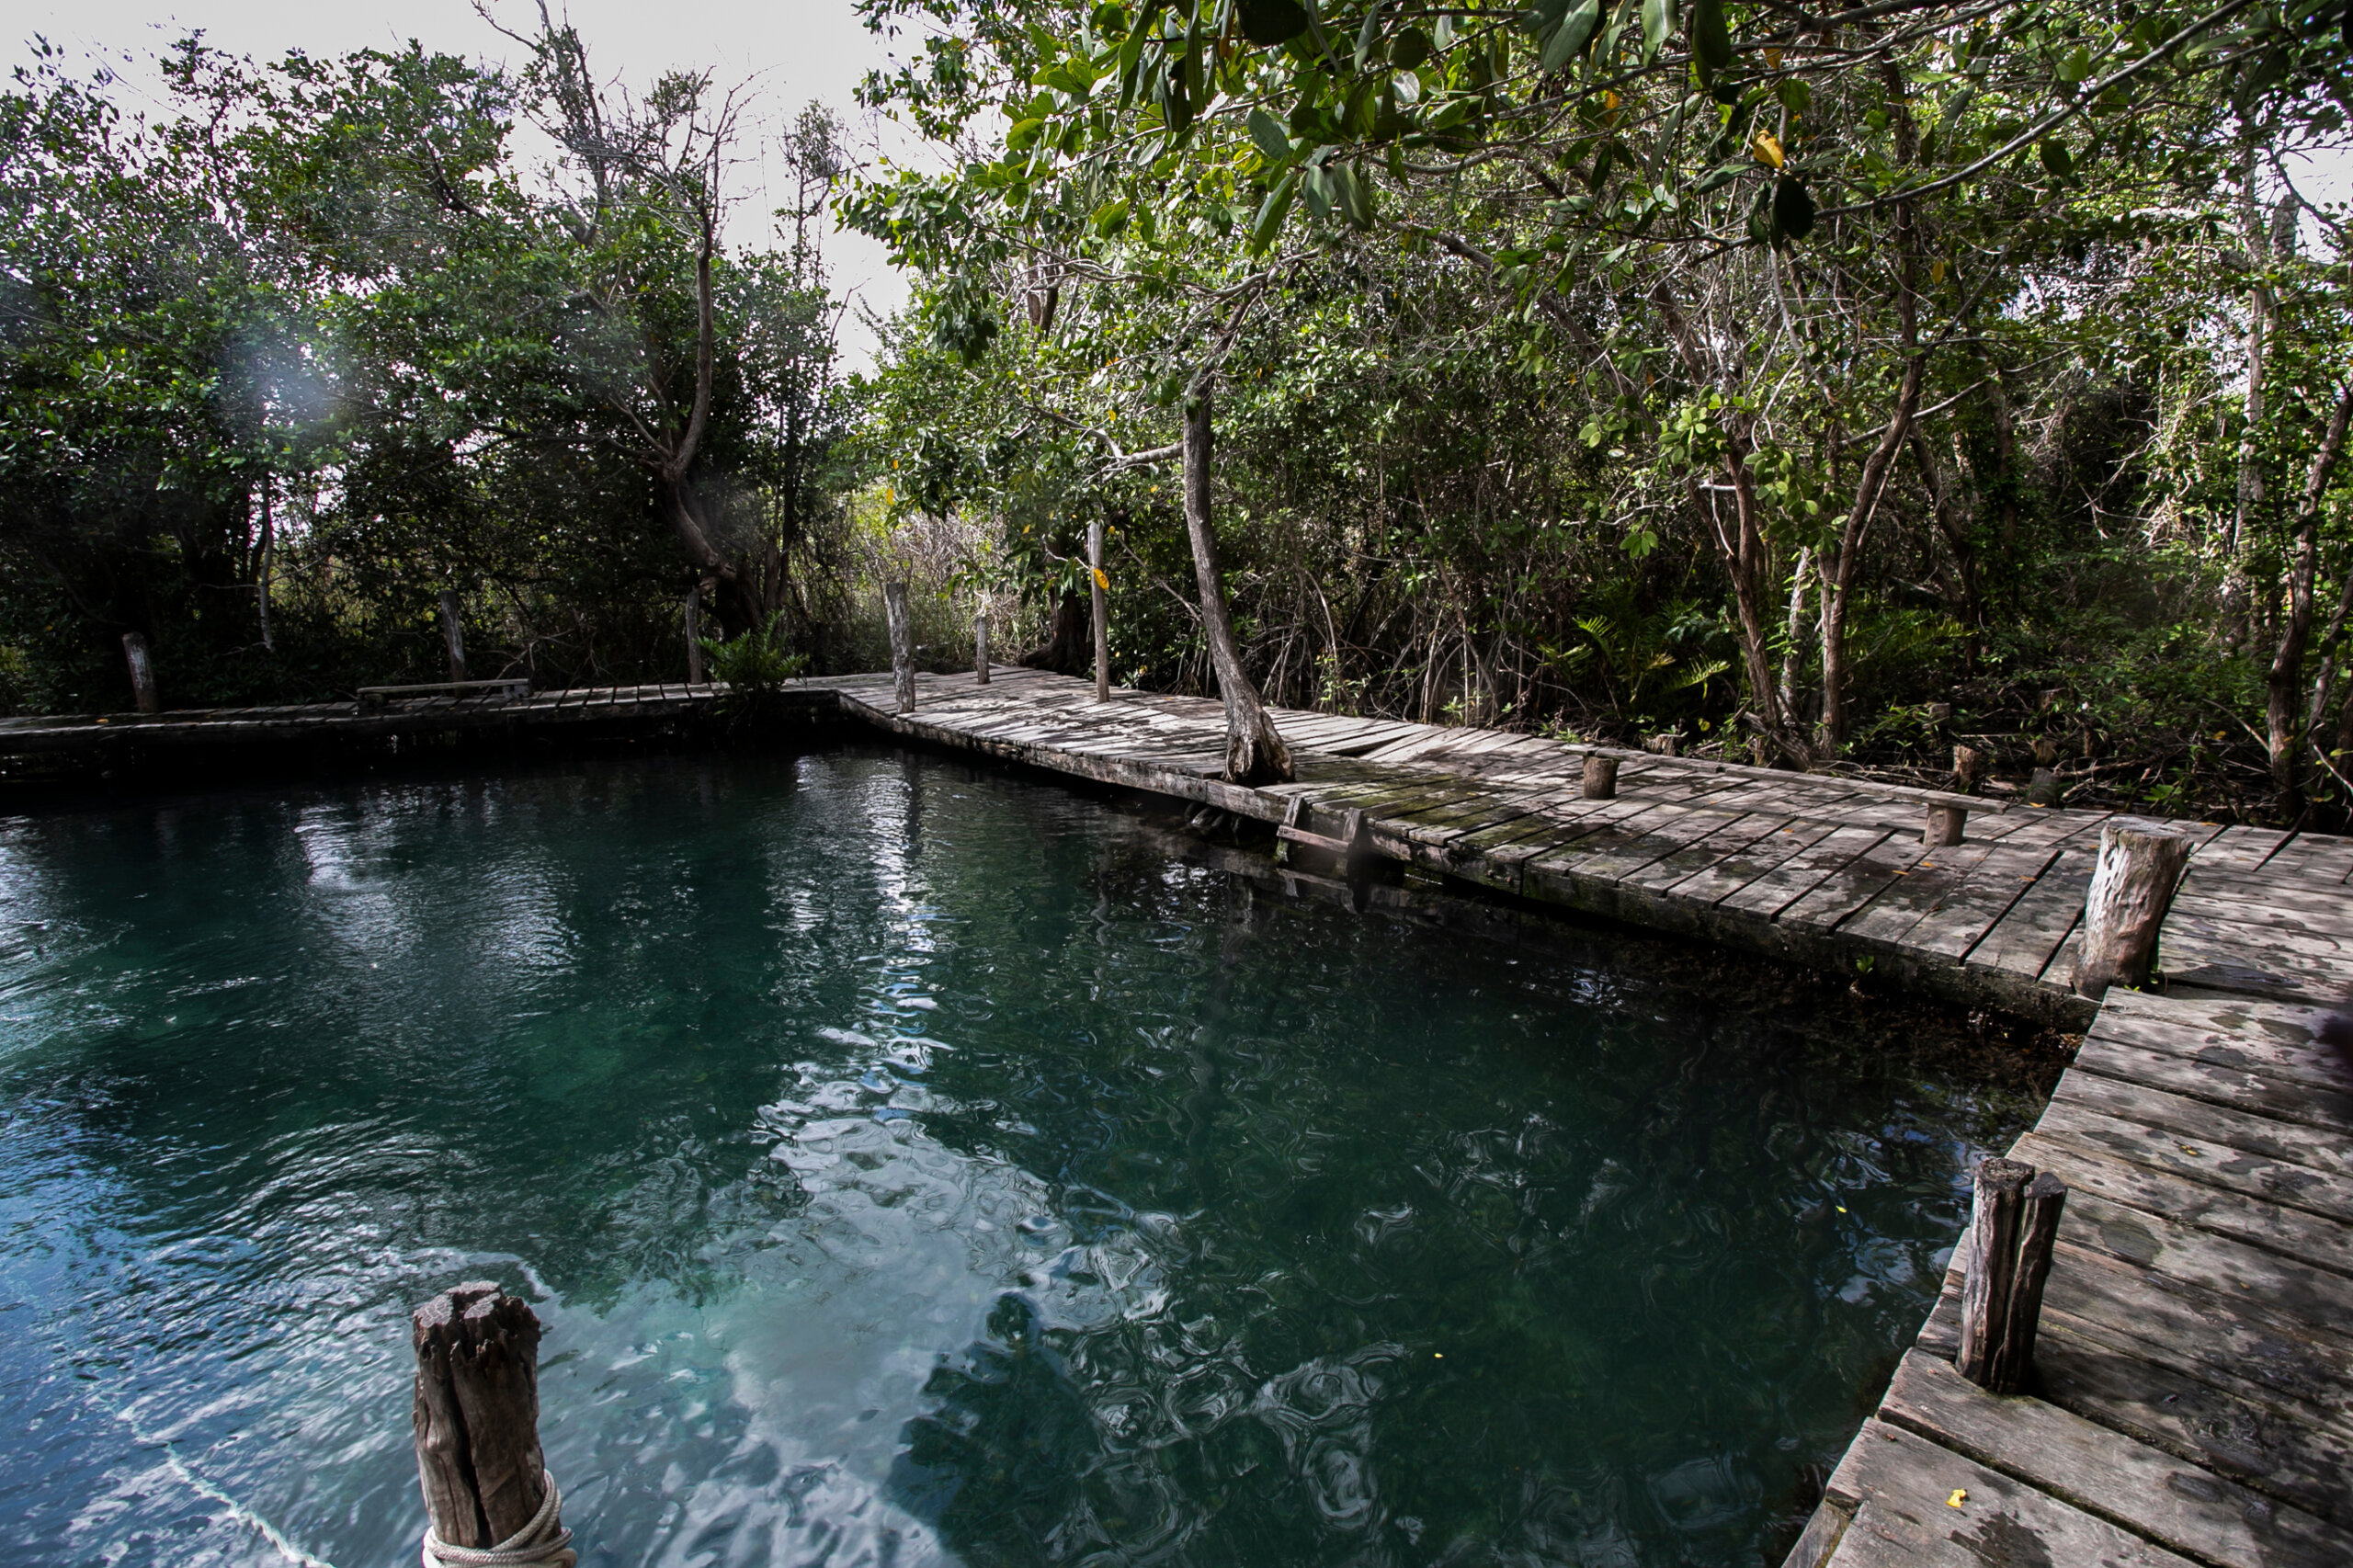 CENOTE OF THE HOLBOX ISLAND IN MEXICO